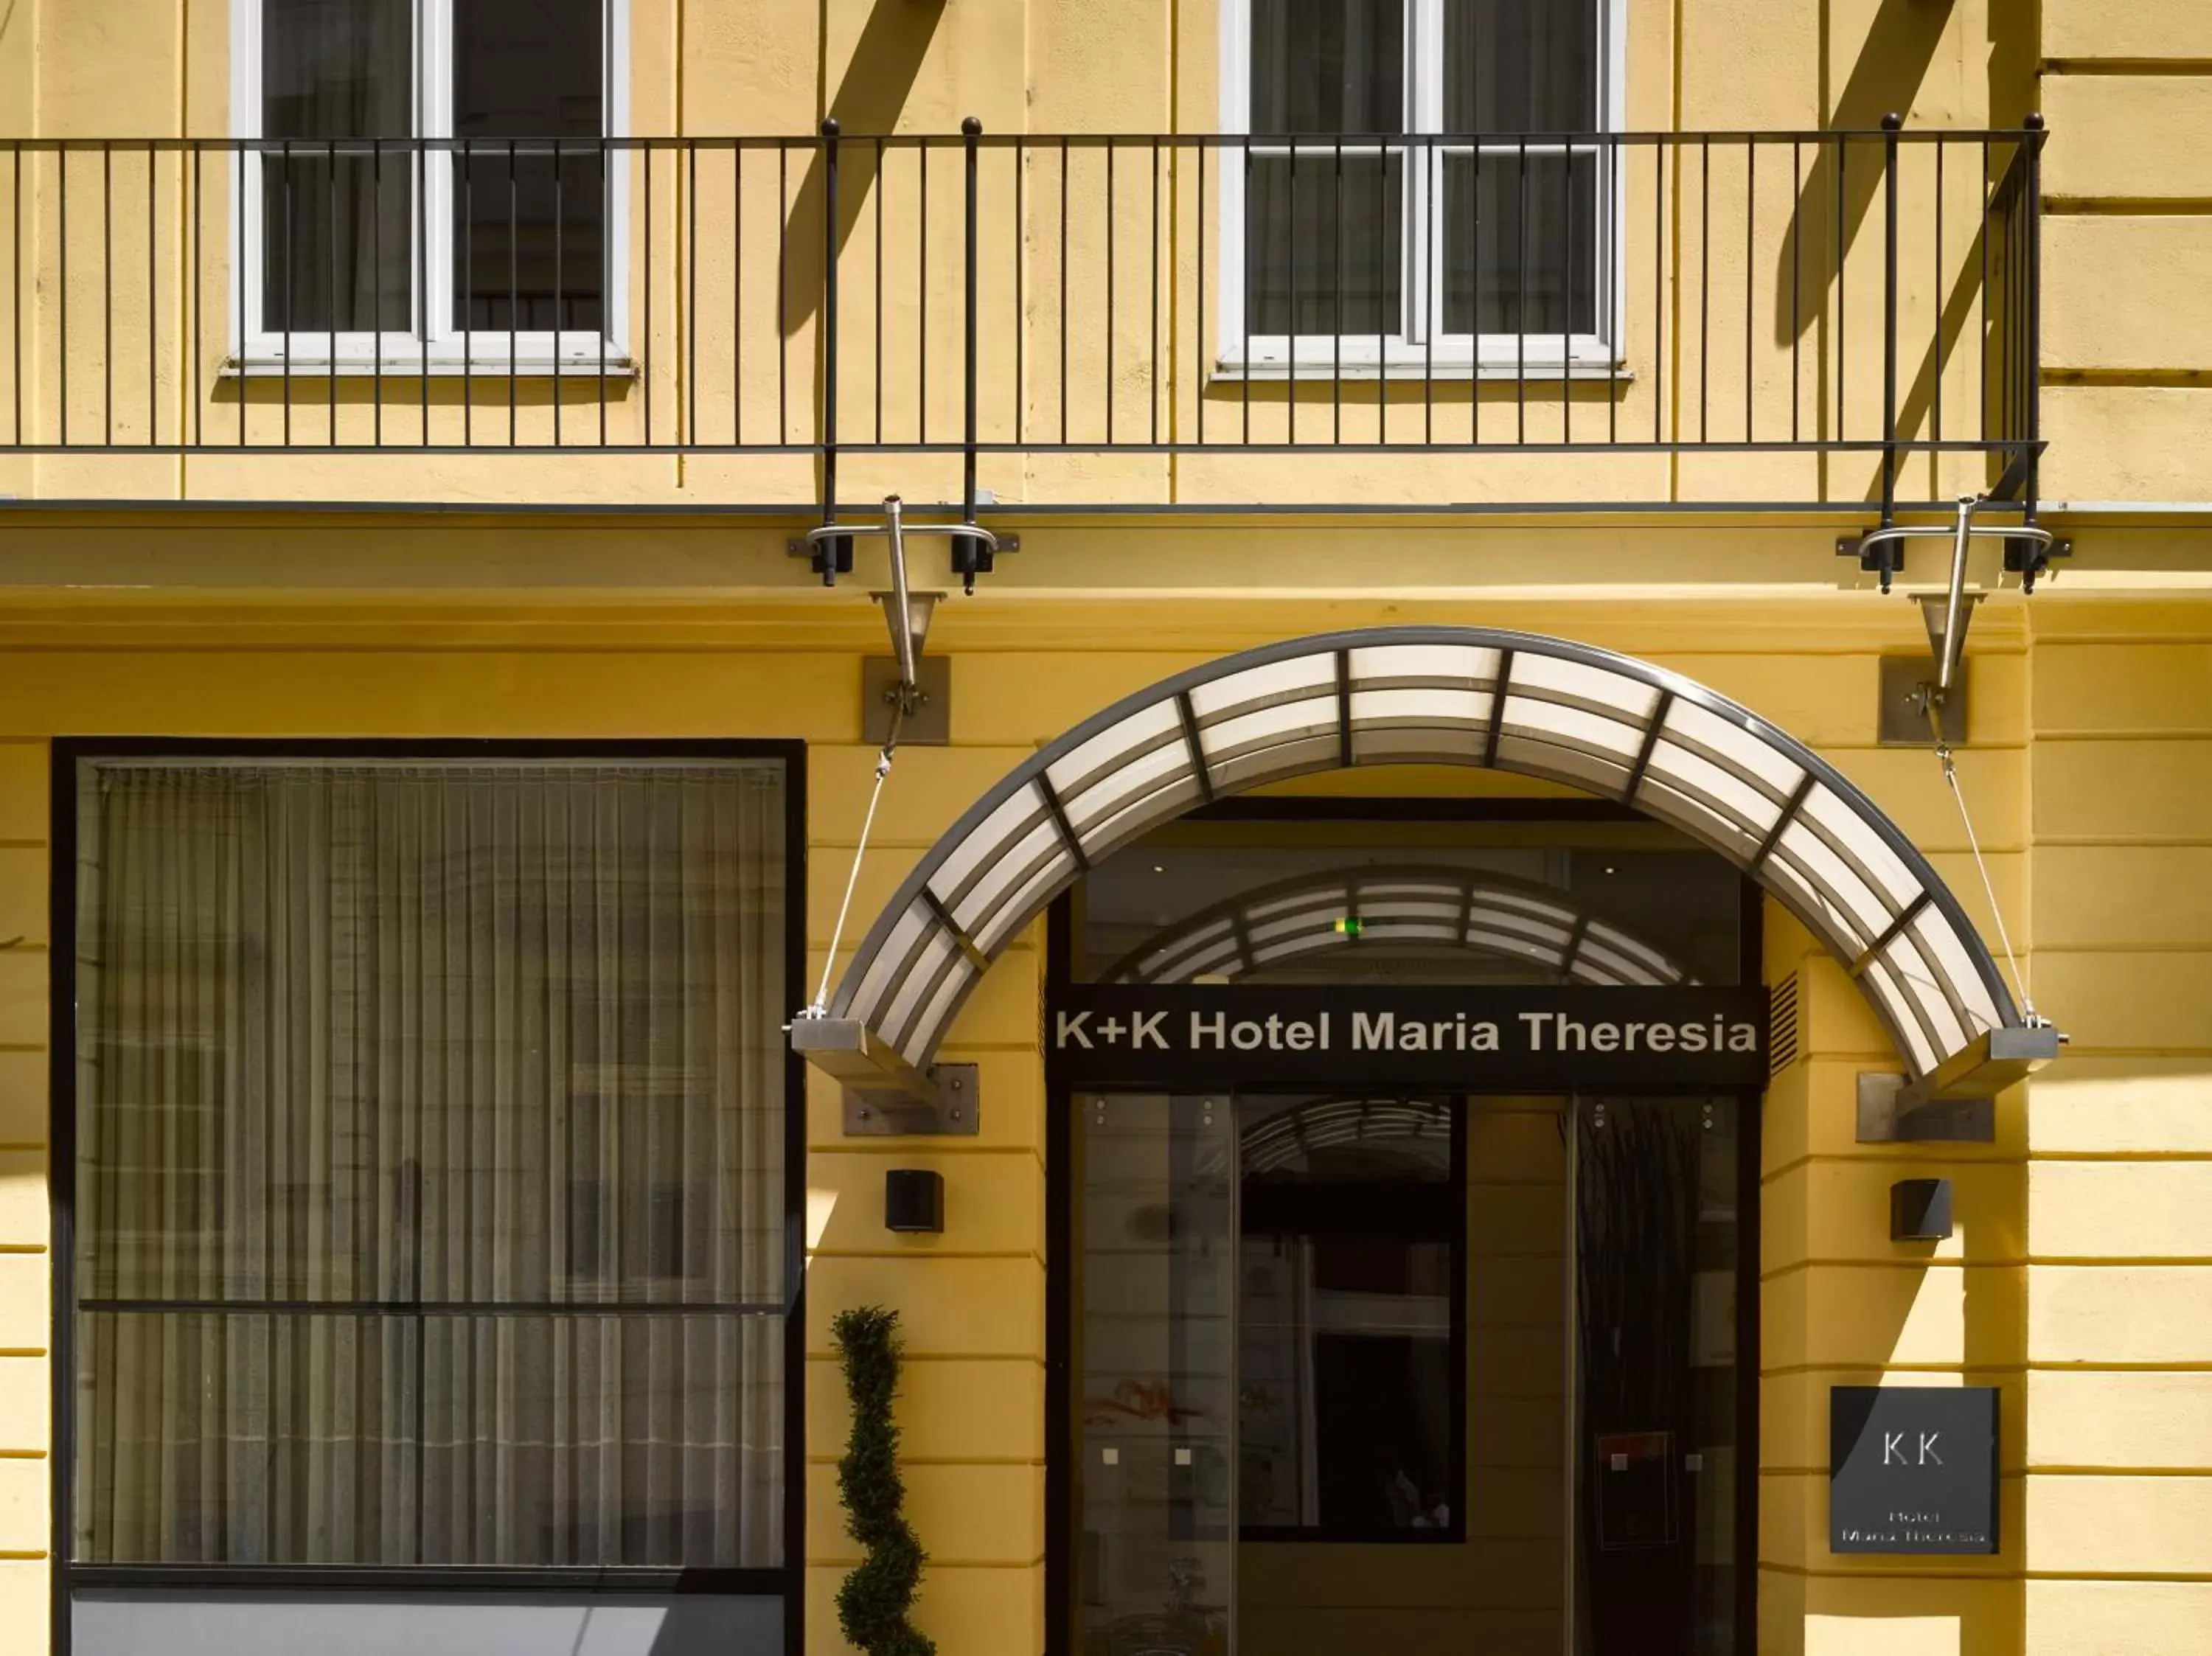 Other, Facade/Entrance in K+K Hotel Maria Theresia